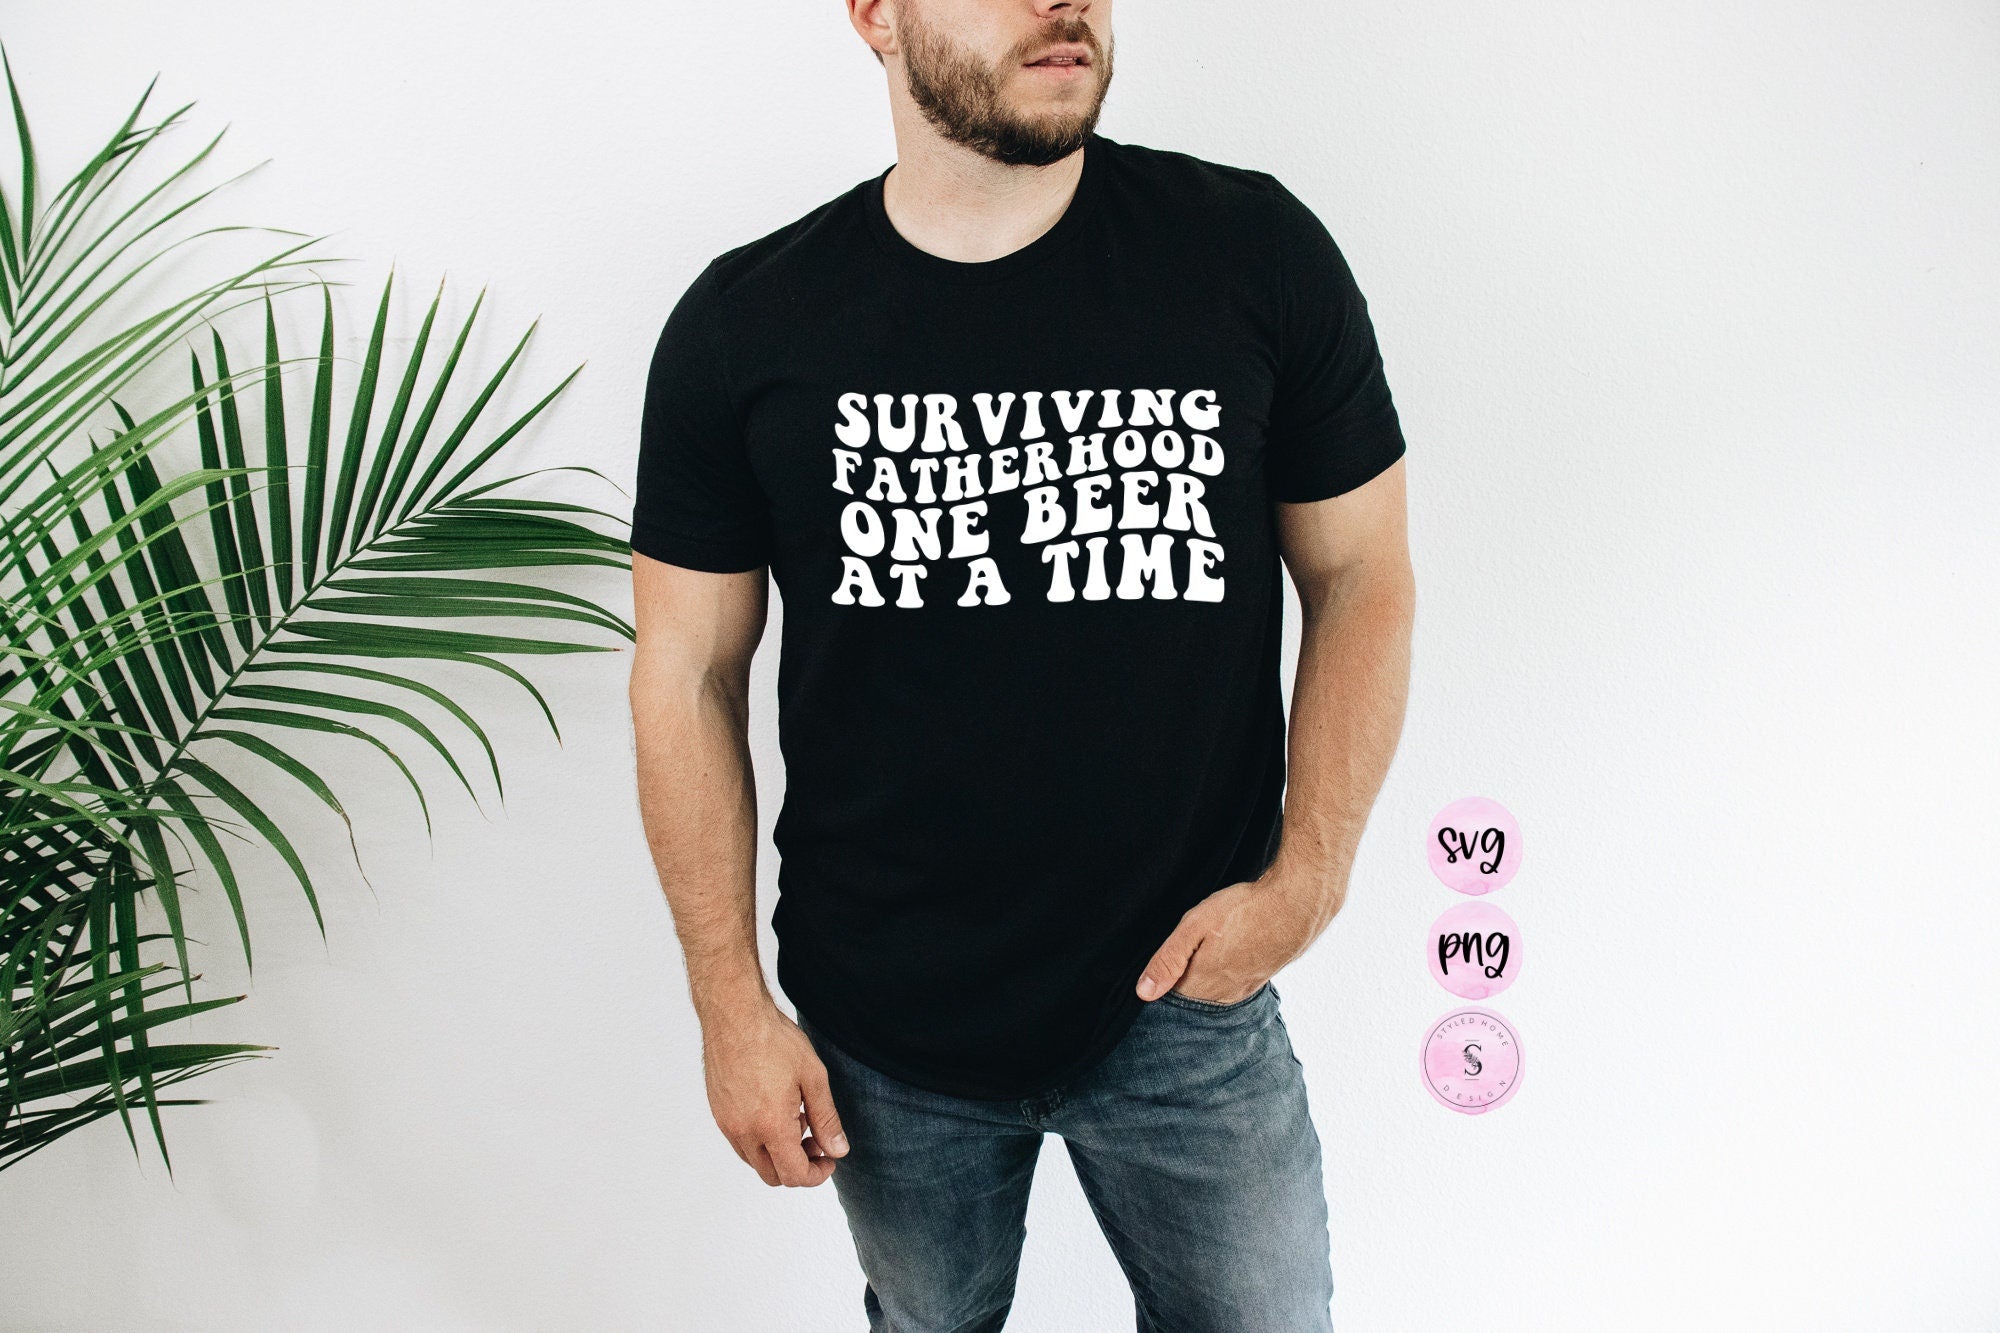 Surviving Fatherhood SVG, Fathers Day Svg, Fathers Day Shirt, Fathers Day Mug, Dad Joke, Svg Cut File, Svg for Cricut, Svg for shirts